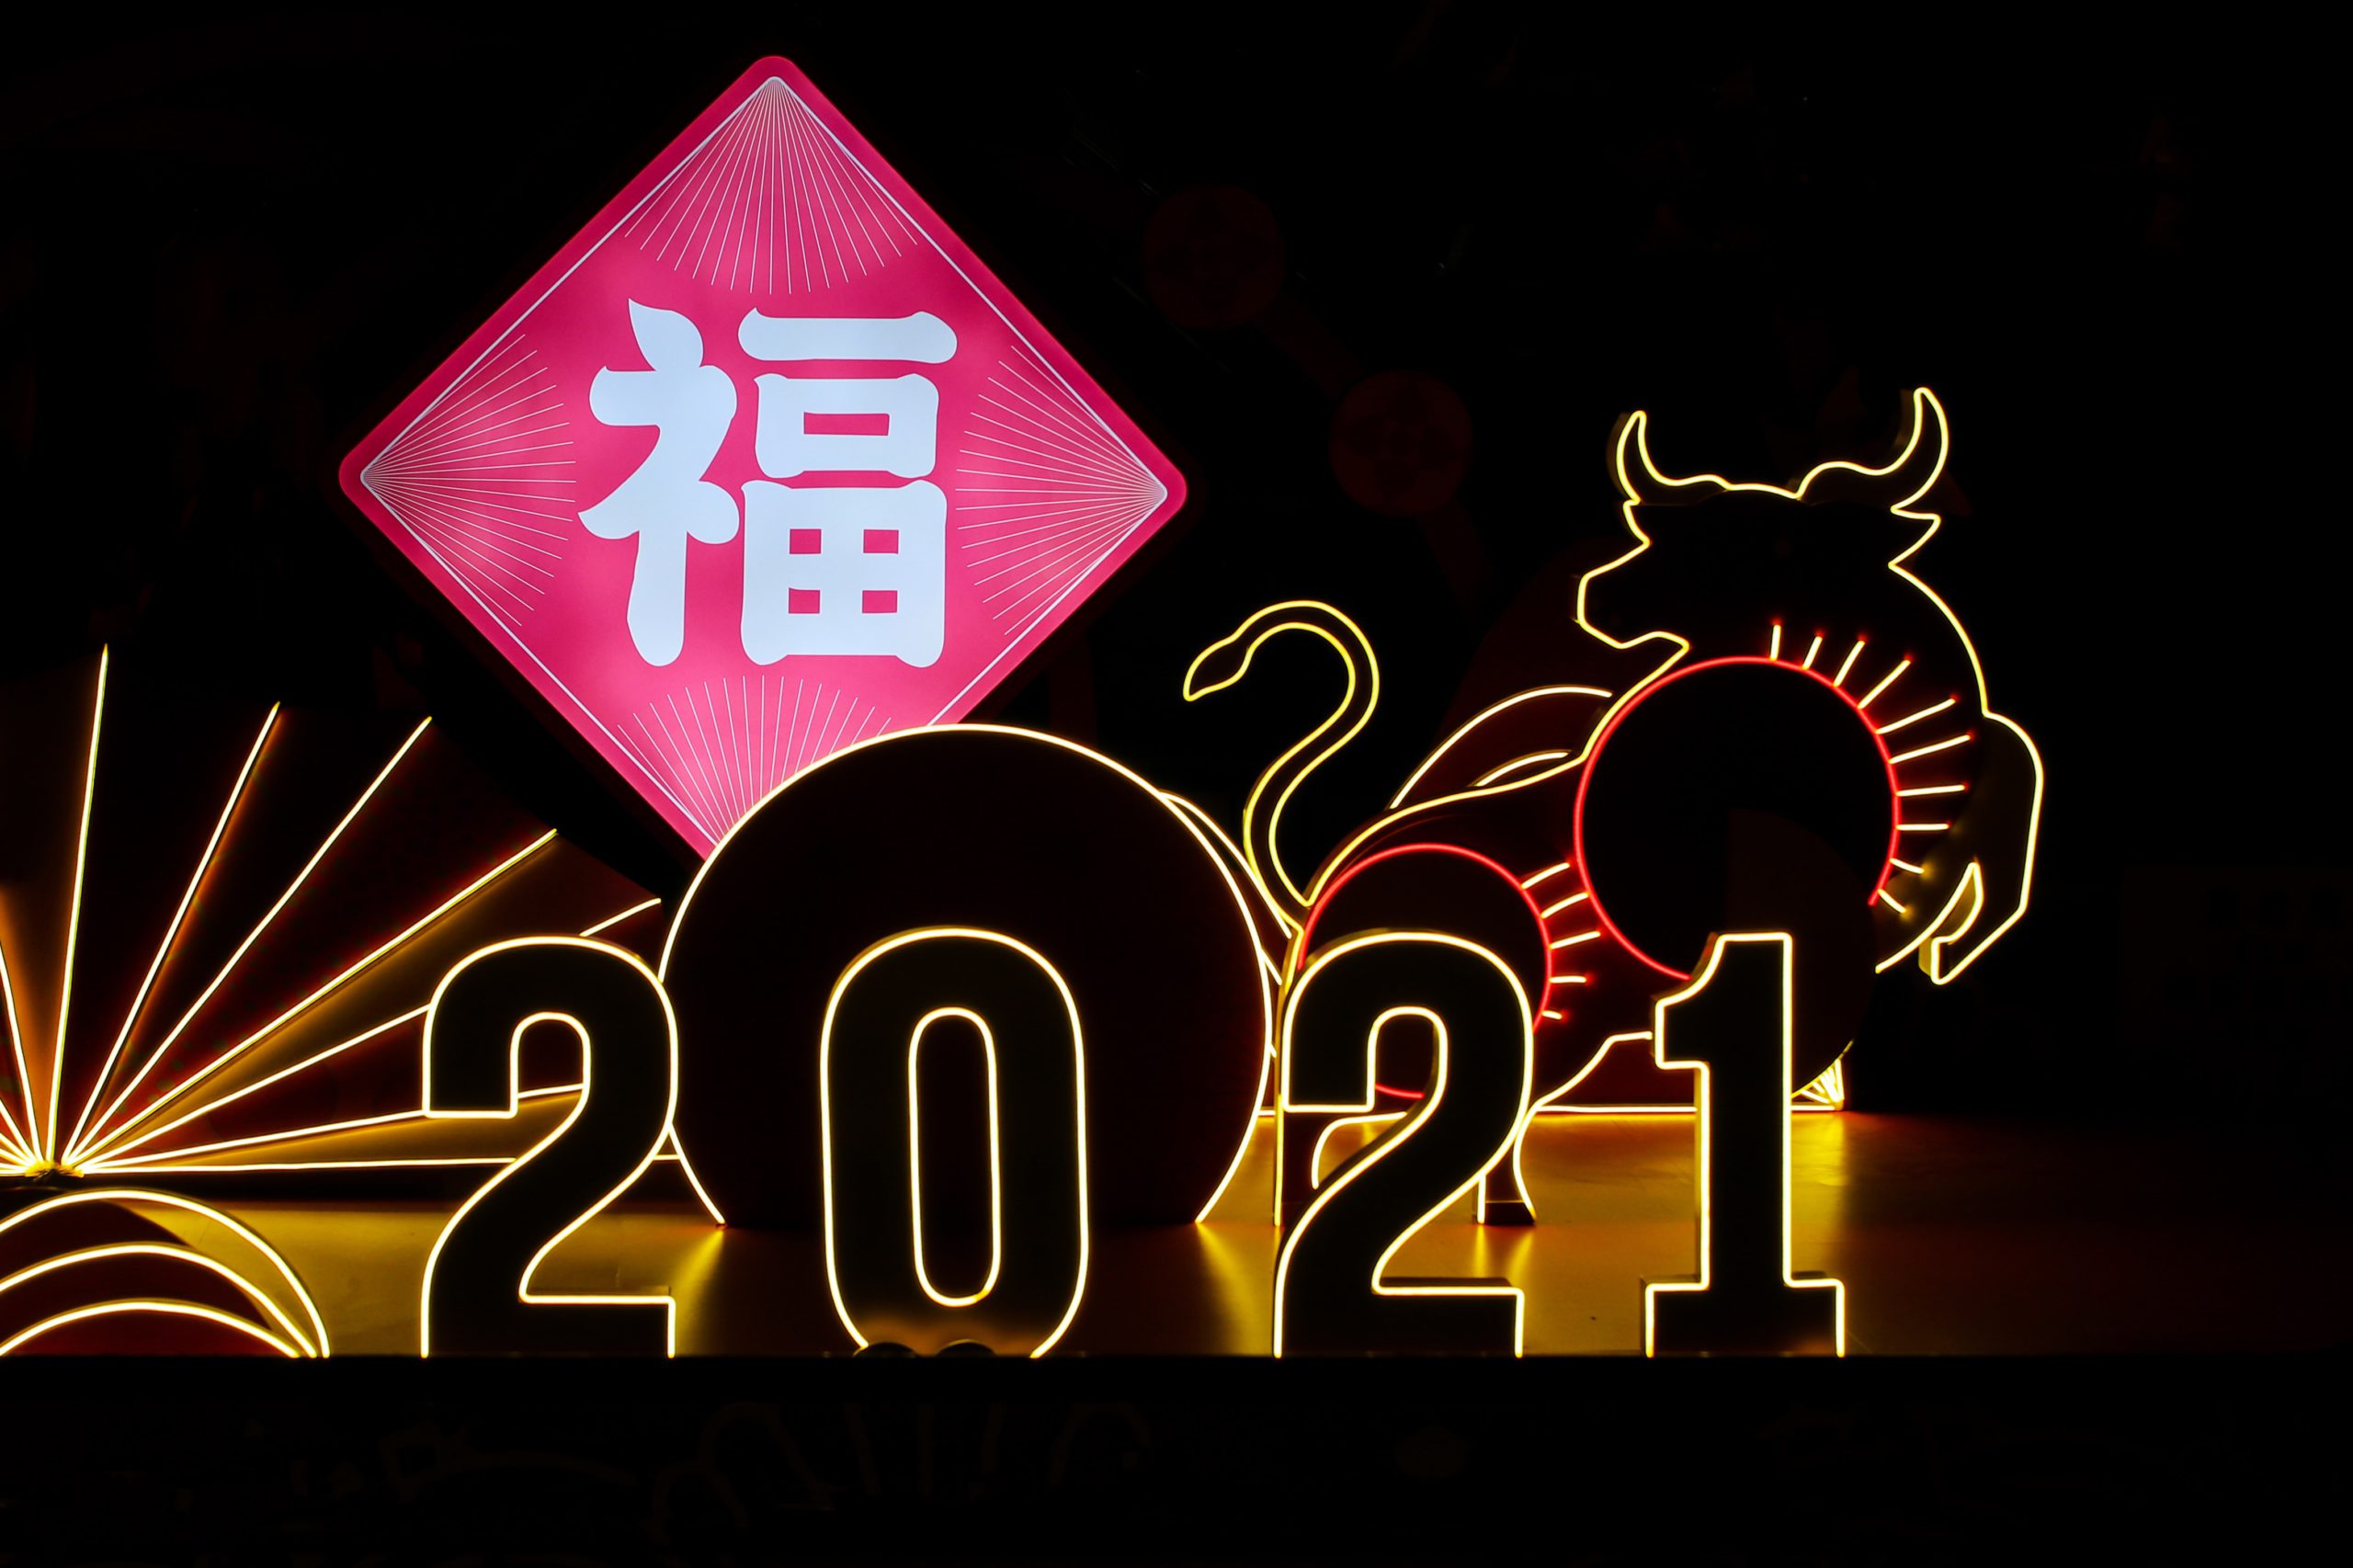 The next generation of internet giants take center stage during Chinese New Year